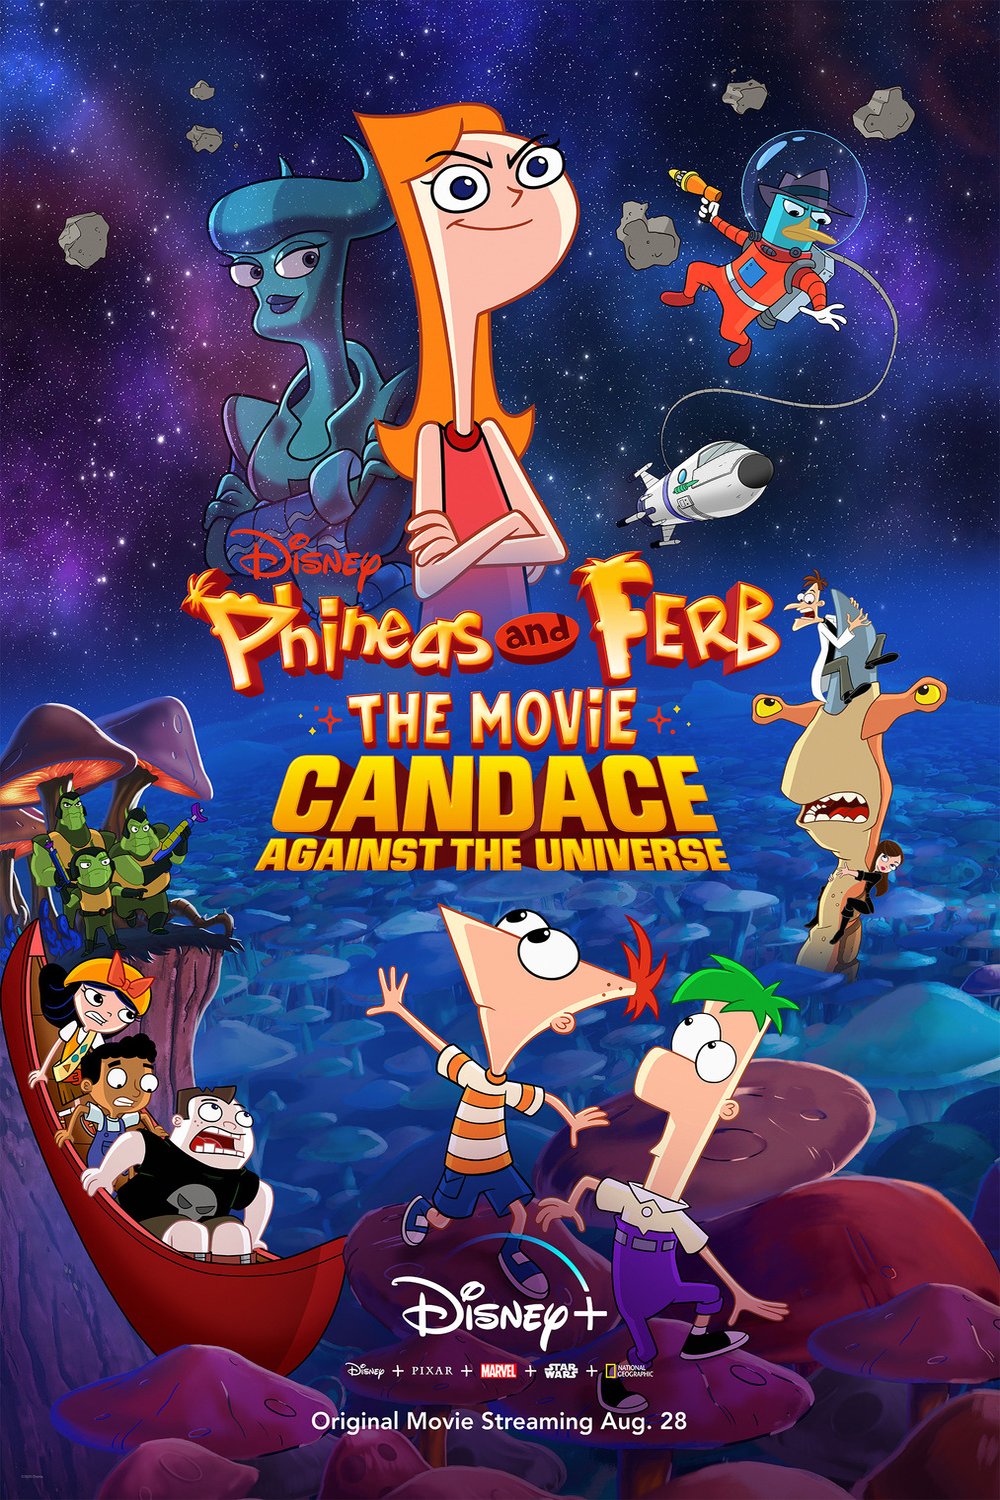 L'affiche du film Phineas and Ferb the Movie: Candace Against the Universe